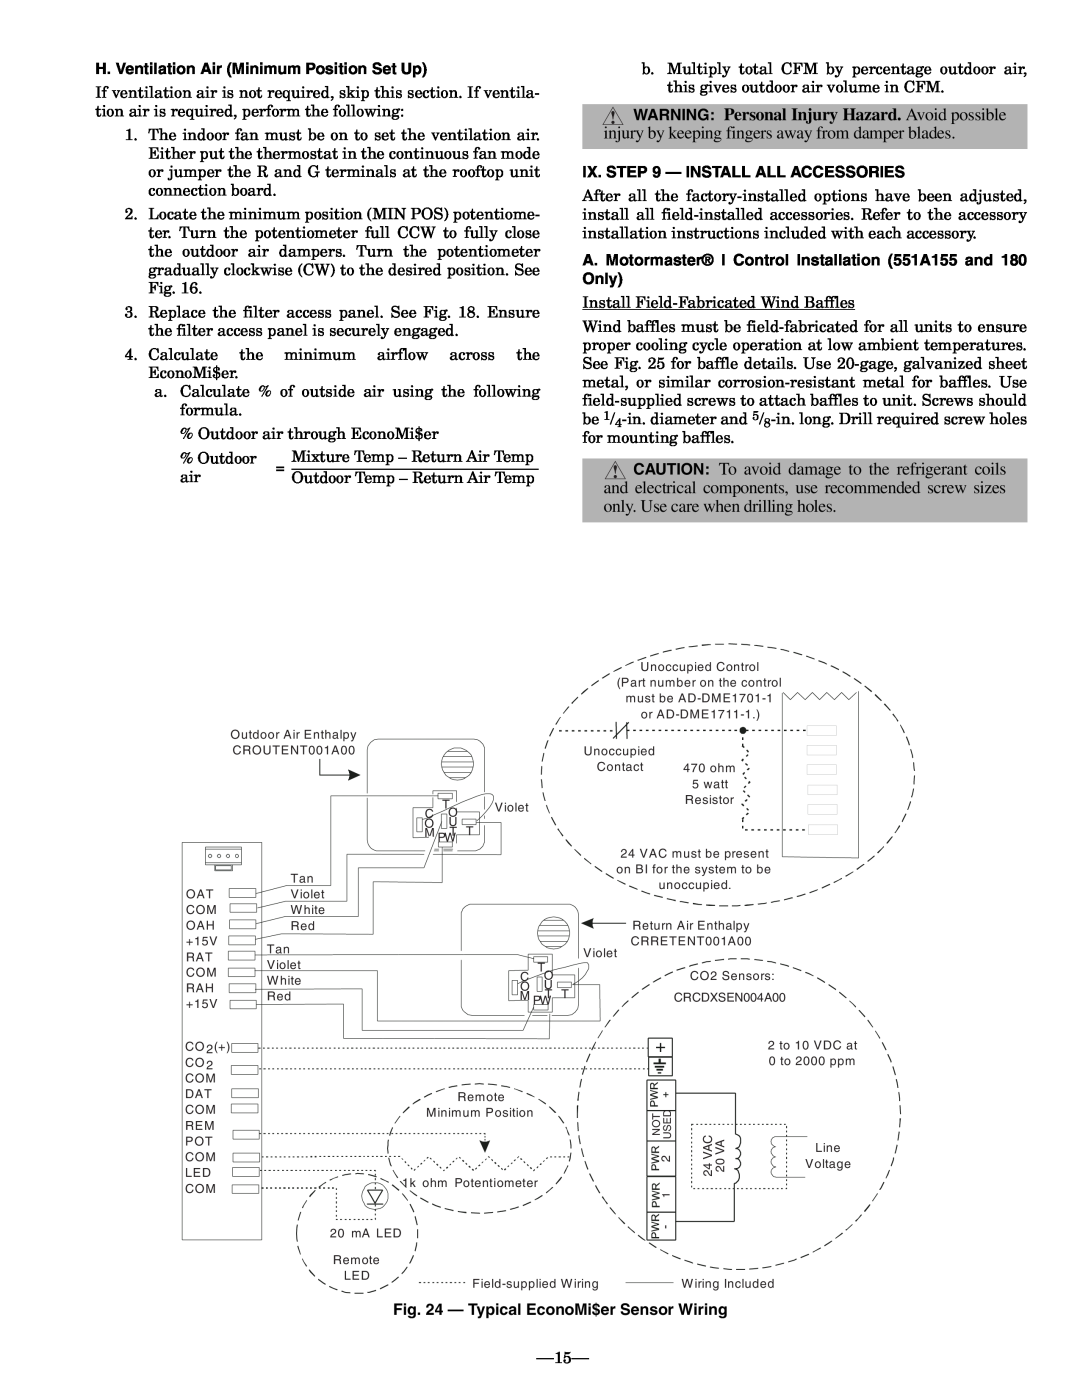 Bryant 551A operation manual 15, H. Ventilation Air Minimum Position Set Up, Ix. — Install All Accessories 